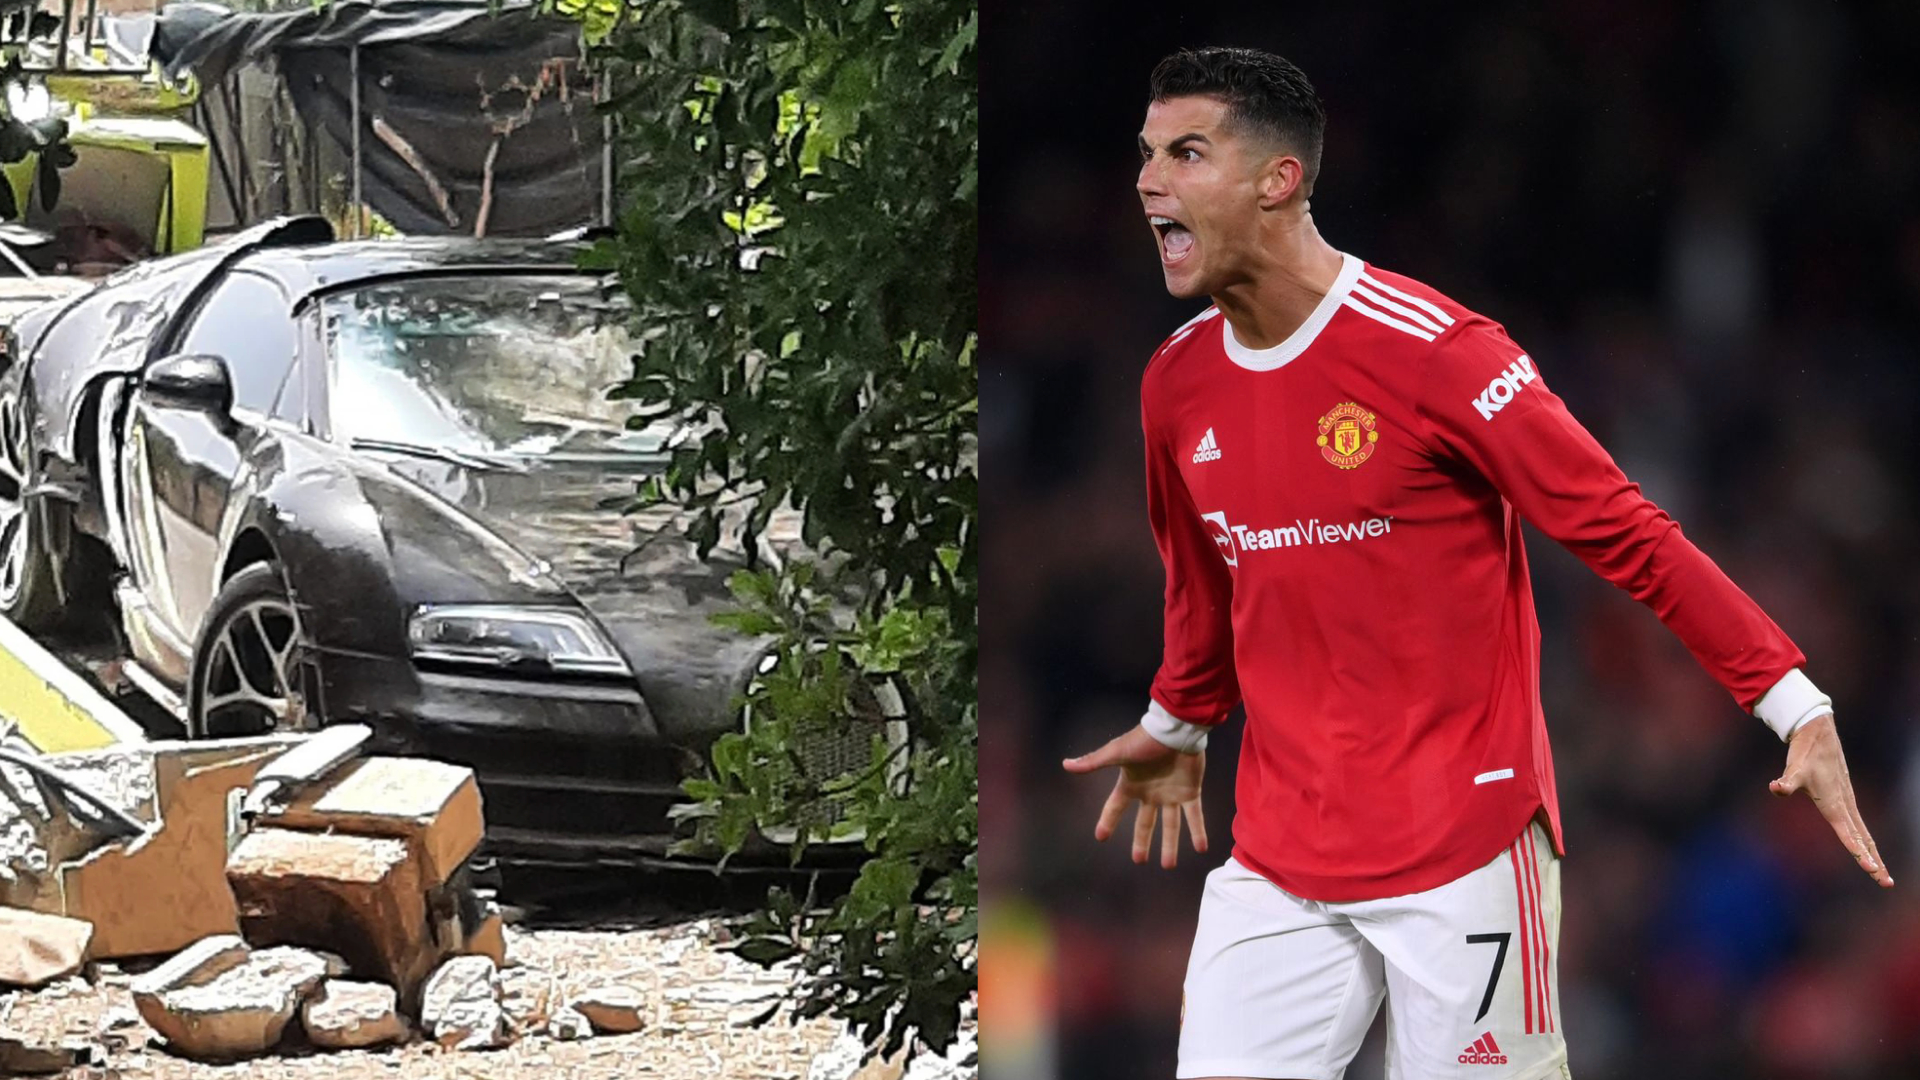 A $2.5 Million Bugatti Owned By Cristiano Ronaldo Just Got Destroyed By His Bodyguard